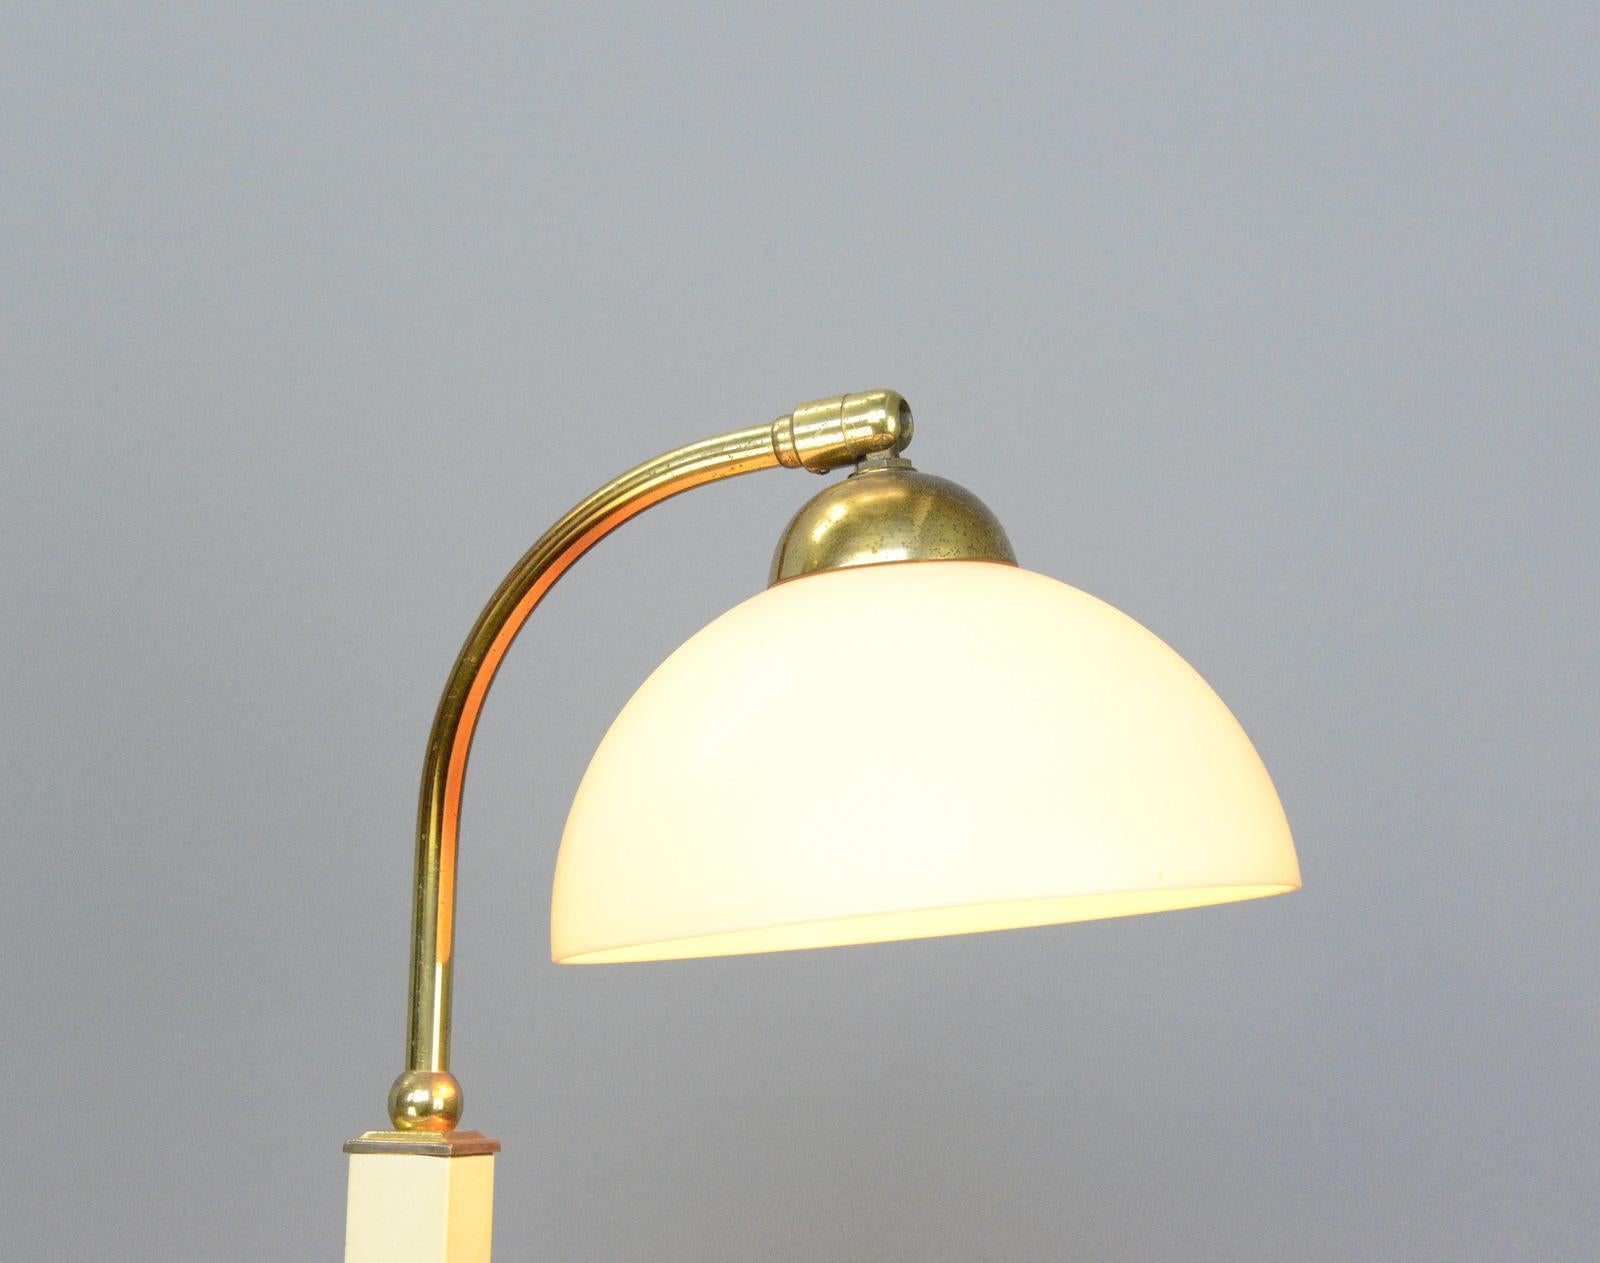 German Art Deco table lamp circa 1920s

- Brass with cream bakelite shade
- On/Off switch on the base
- Takes E27 fitting bulbs
- German ~ 1920s
- 42cm tall x 33cm deep x 20cm wide

Condition Report

Fully re wired with modern electrical